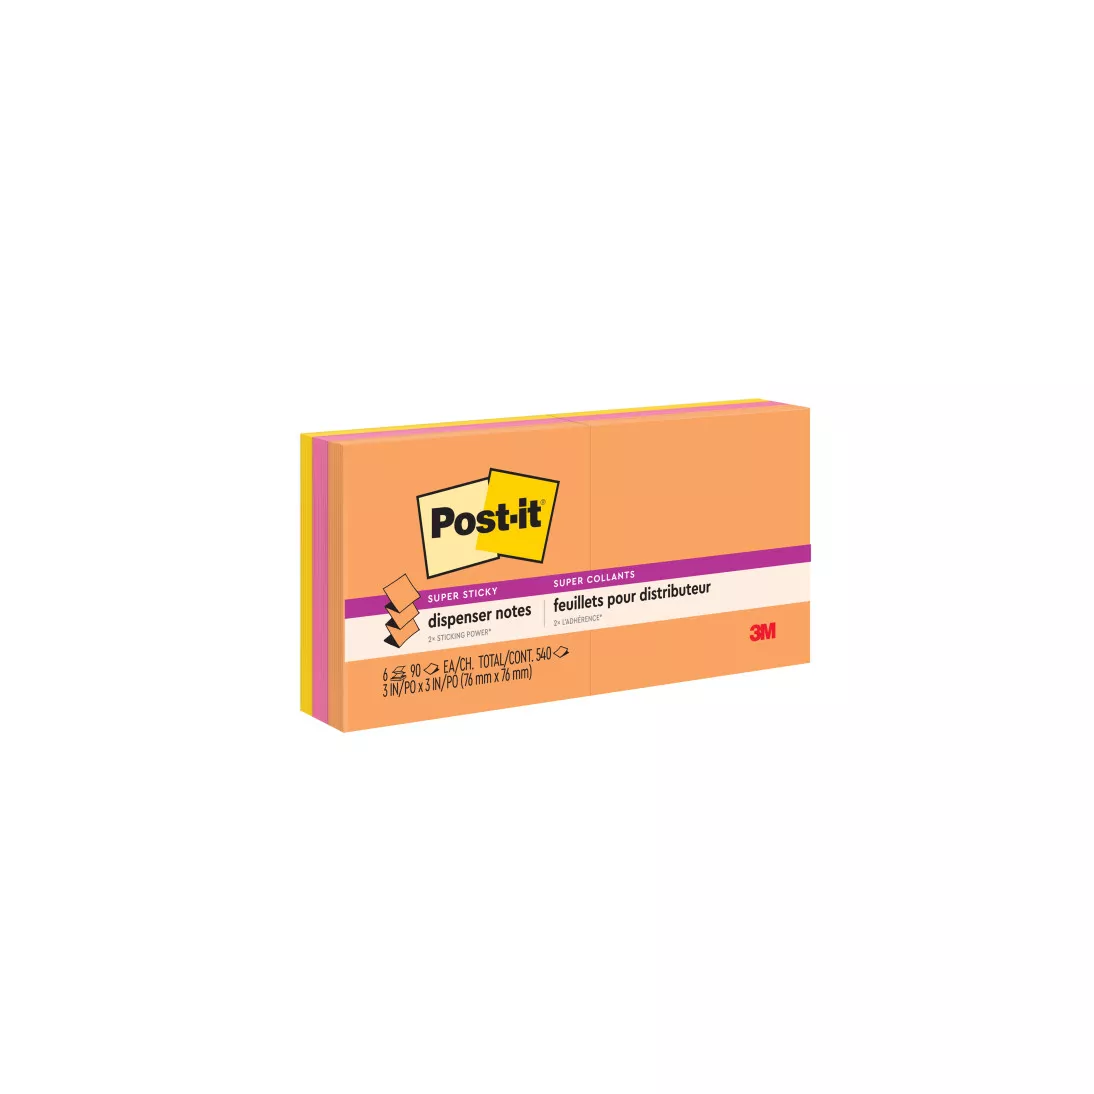 Post-it® Super Sticky Pop-up Notes R330-6SSUC, 3 in x 3 in (76 mm x 76
mm)